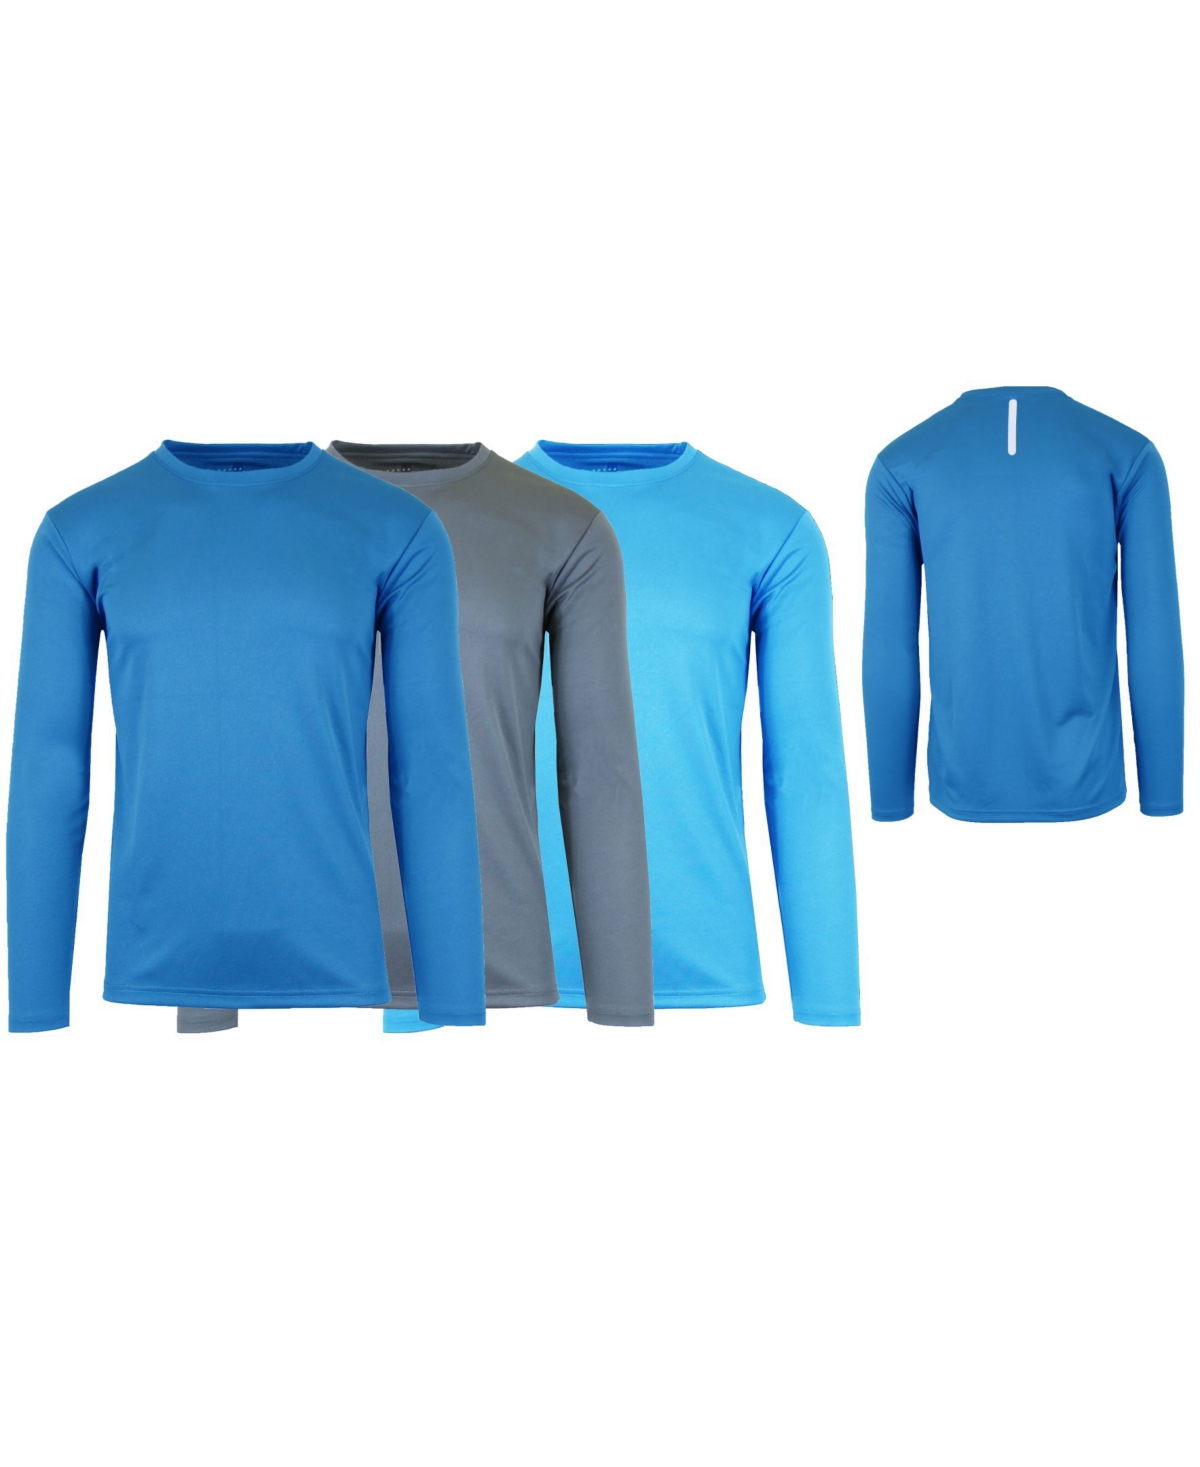 Galaxy By Harvic Men's Long Sleeve Moisture-wicking Performance Tee, Pack Of 3 In Medium Blue,charcoal,light Blue